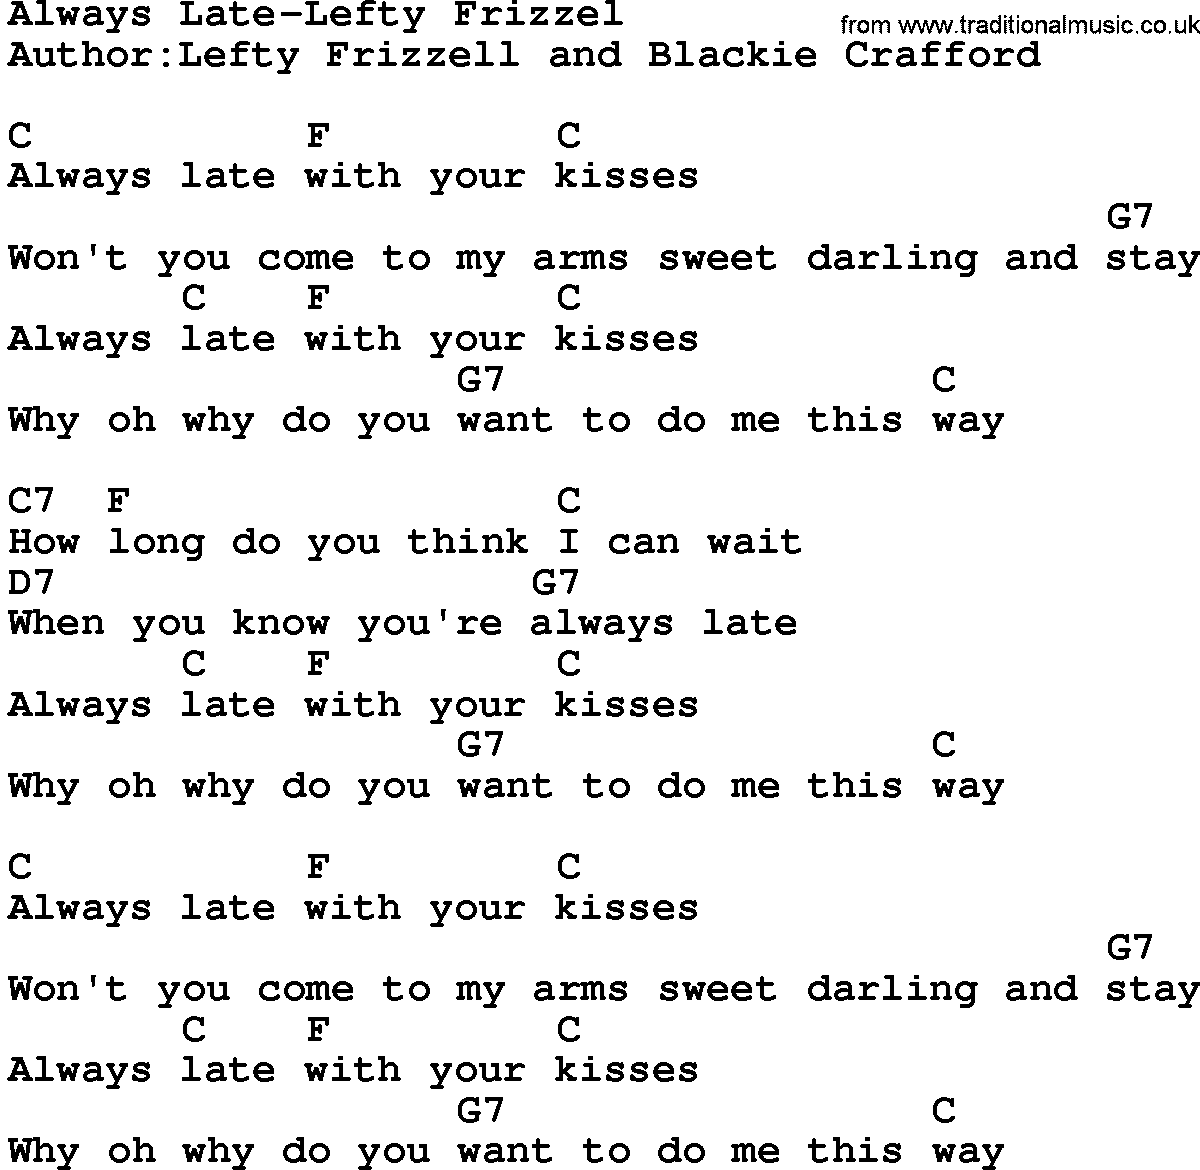 Country music song: Always Late-Lefty Frizzel lyrics and chords